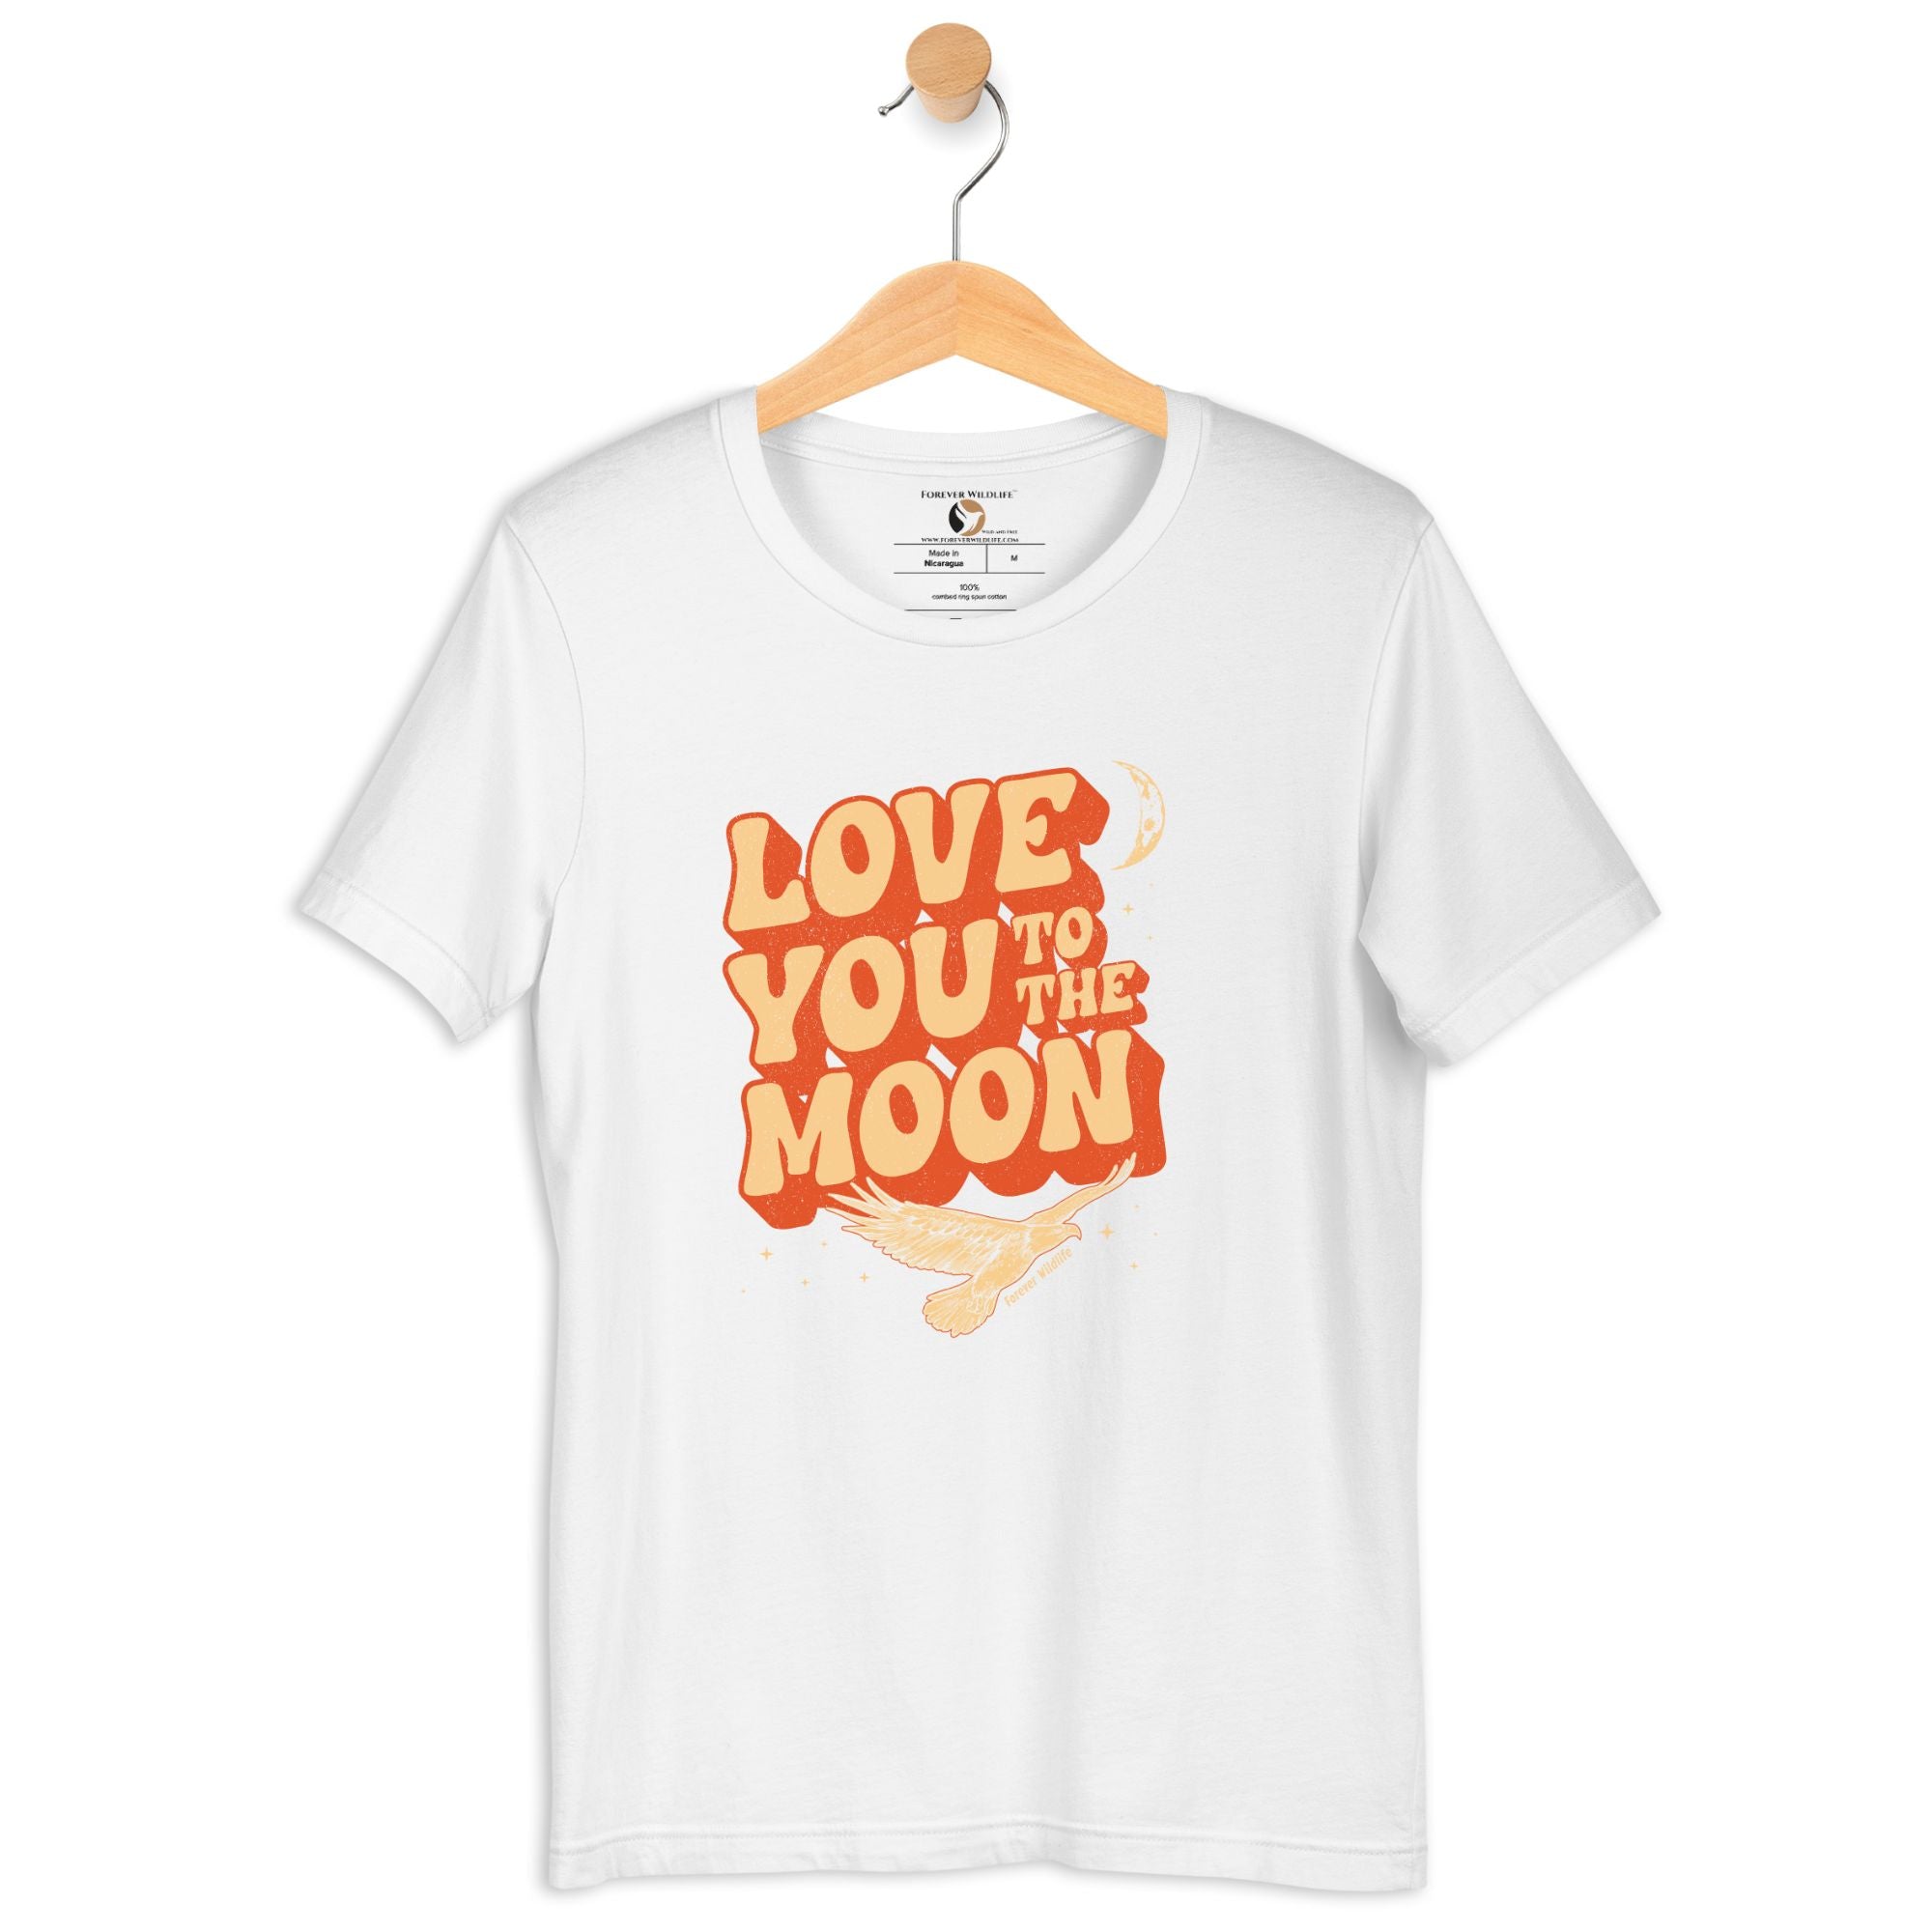 Eagle T-Shirt in White – Premium Wildlife T-Shirt Design with Love You To The Moon Text, Eagle Shirts and Wildlife Clothing